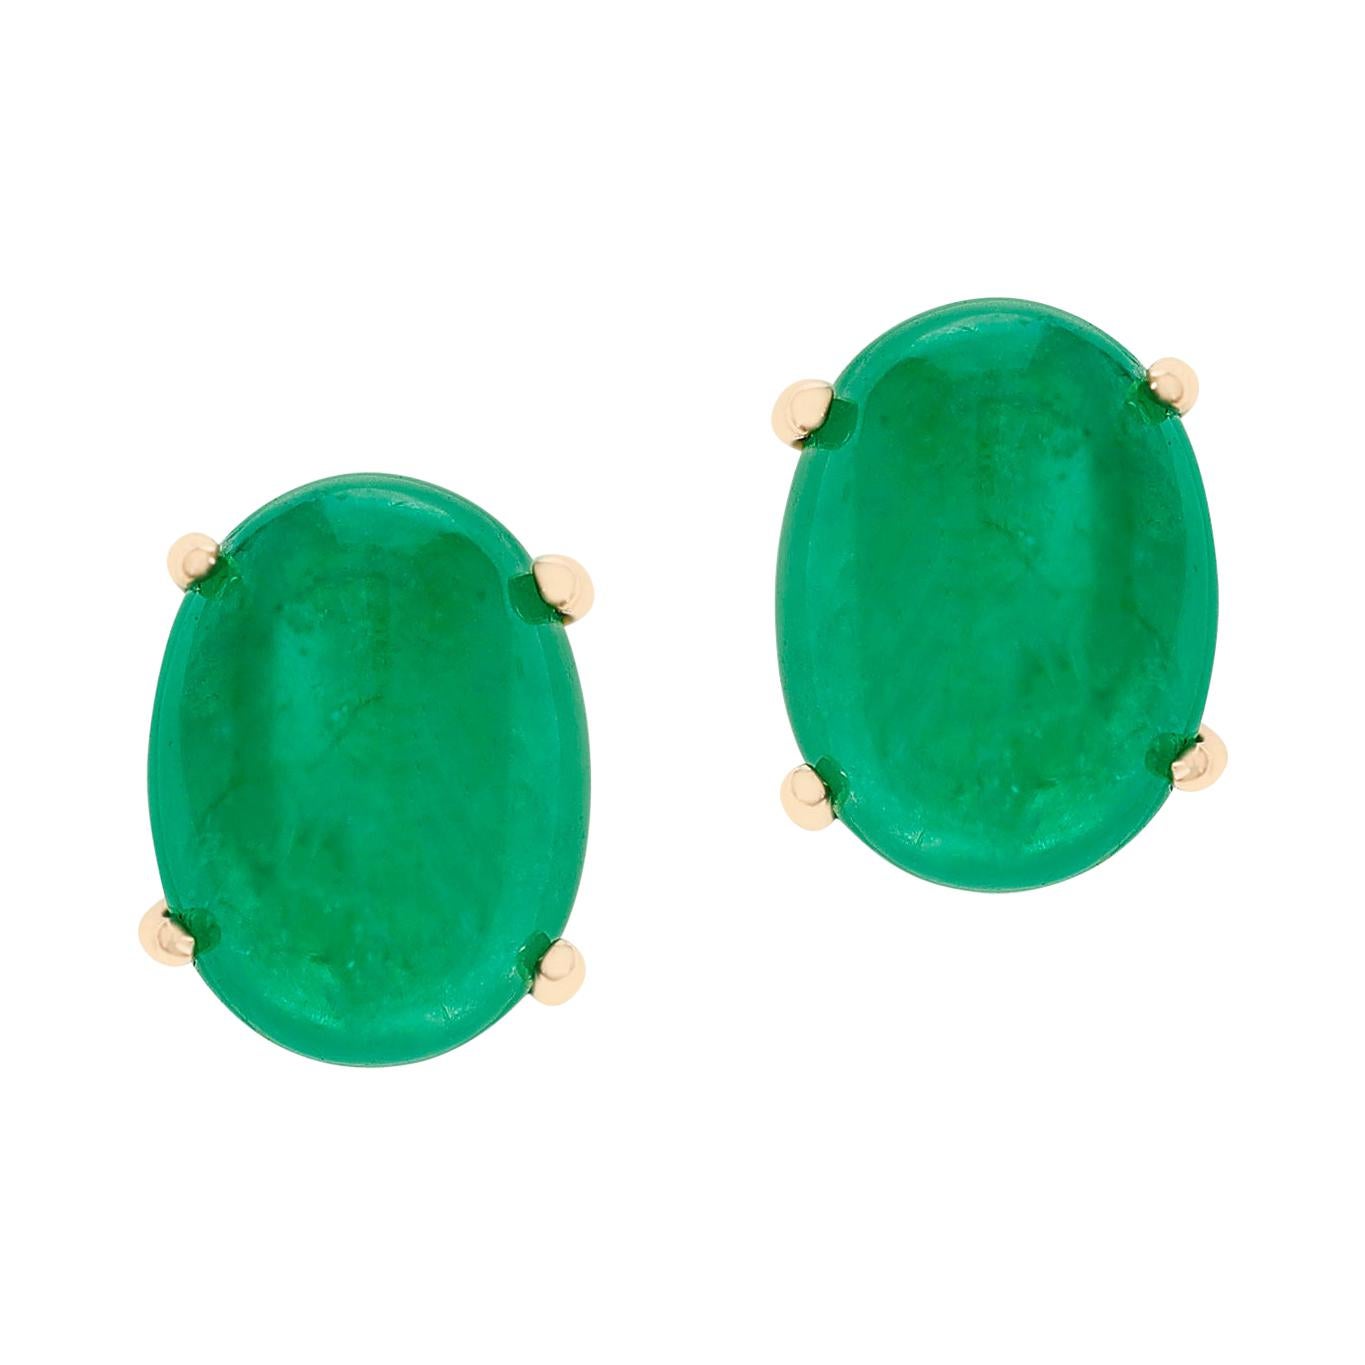 Emerald Oval Cabochon Stud Earrings Made in 14 Karat Yellow Gold